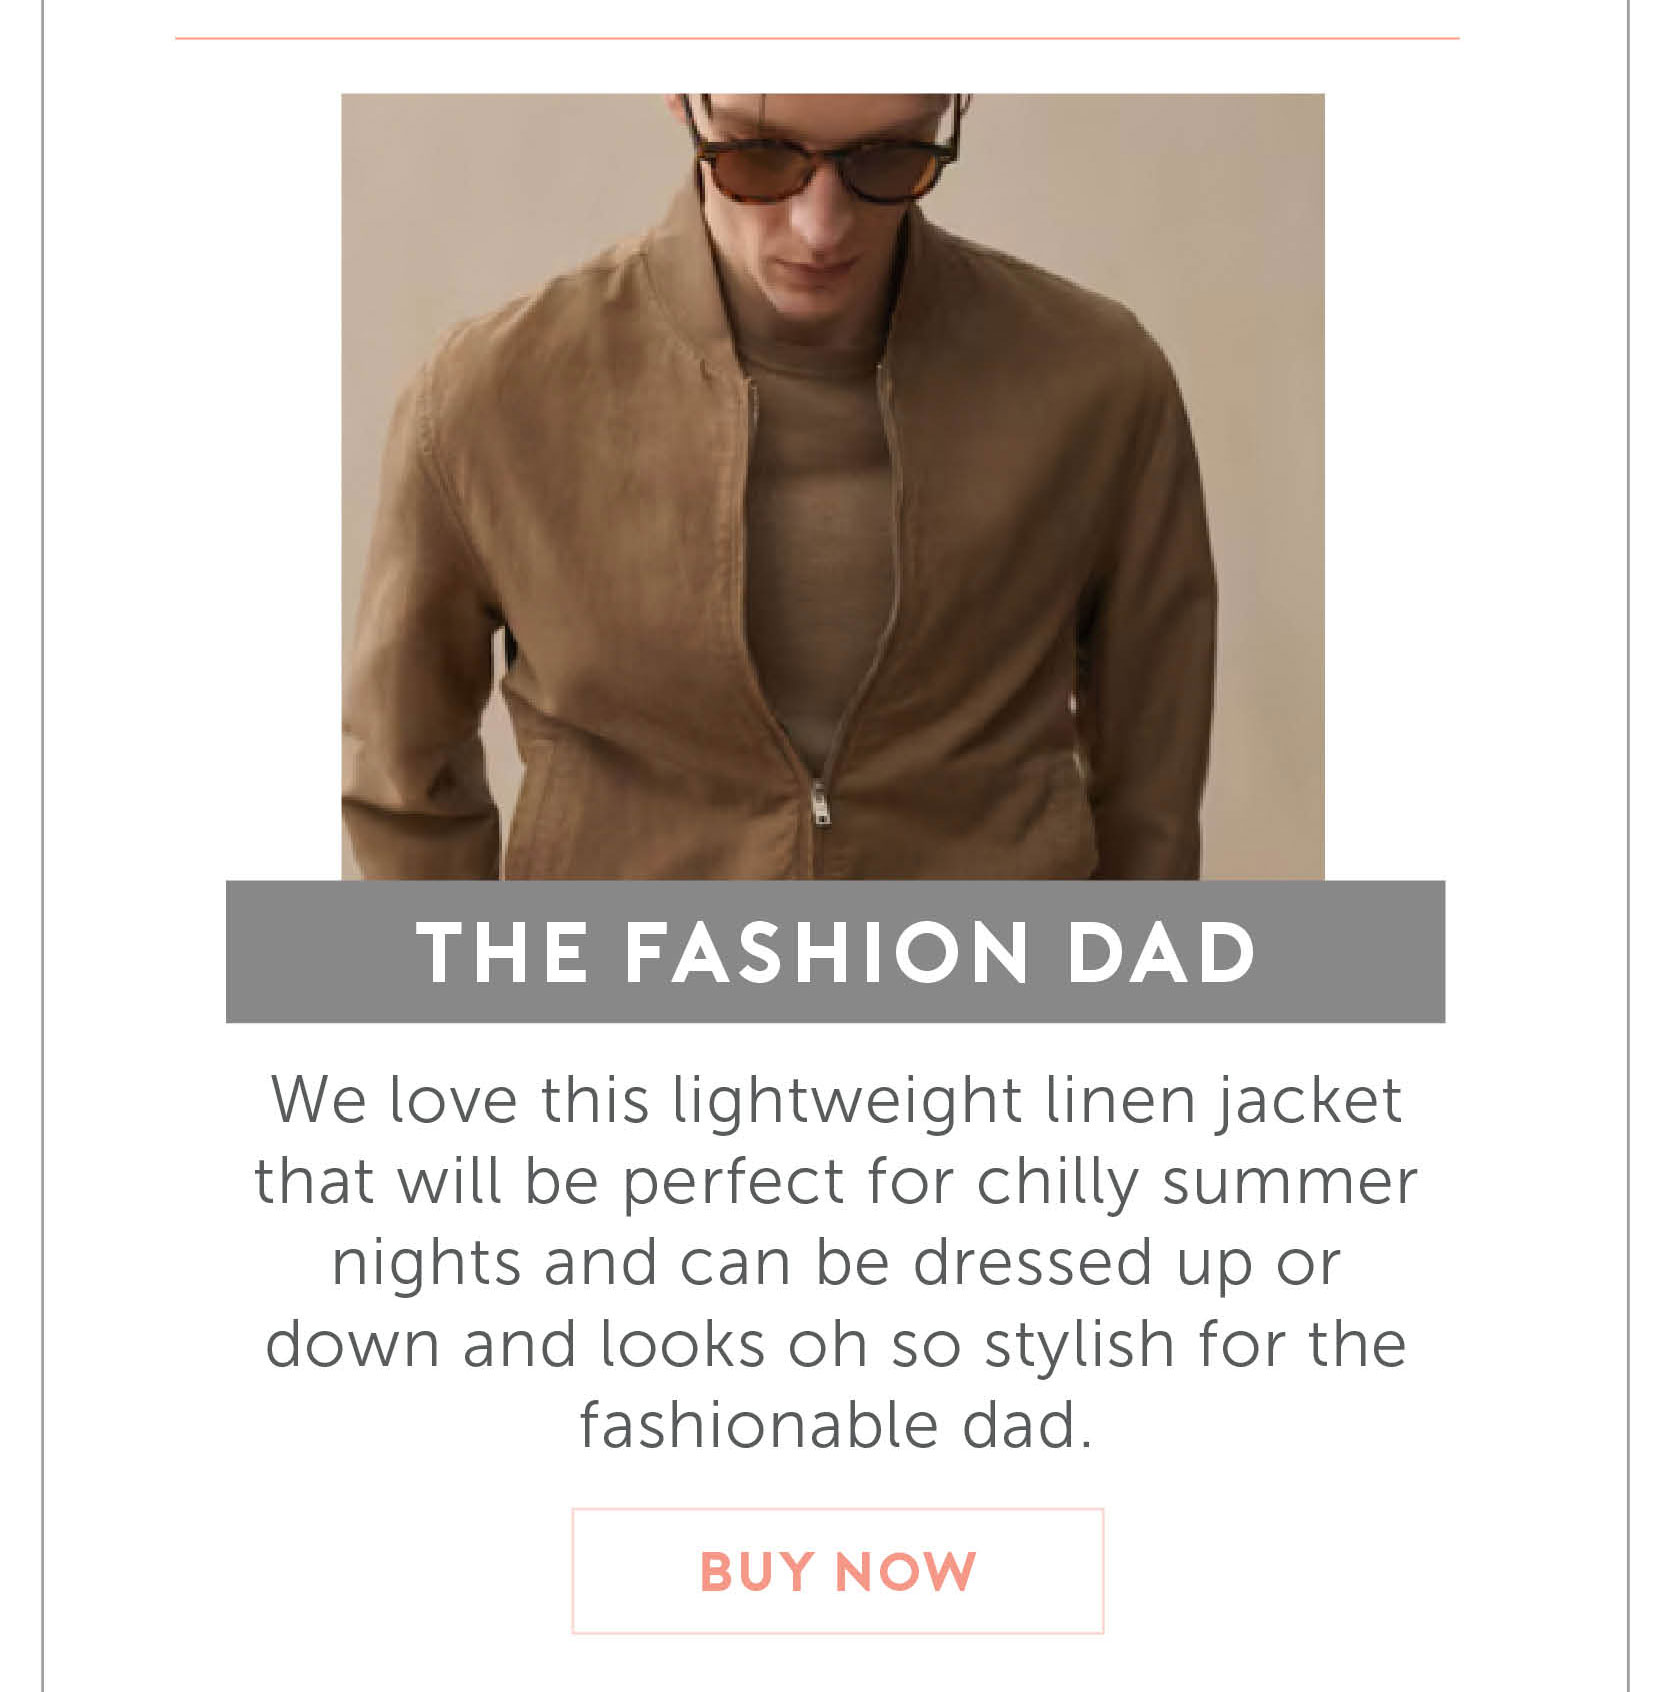 For the Fashion Dad. We love this lightweight linen jacket that will be perfect for chilly summer nights and can be dressed up or down and looks oh so stylish for the fashionable dad.